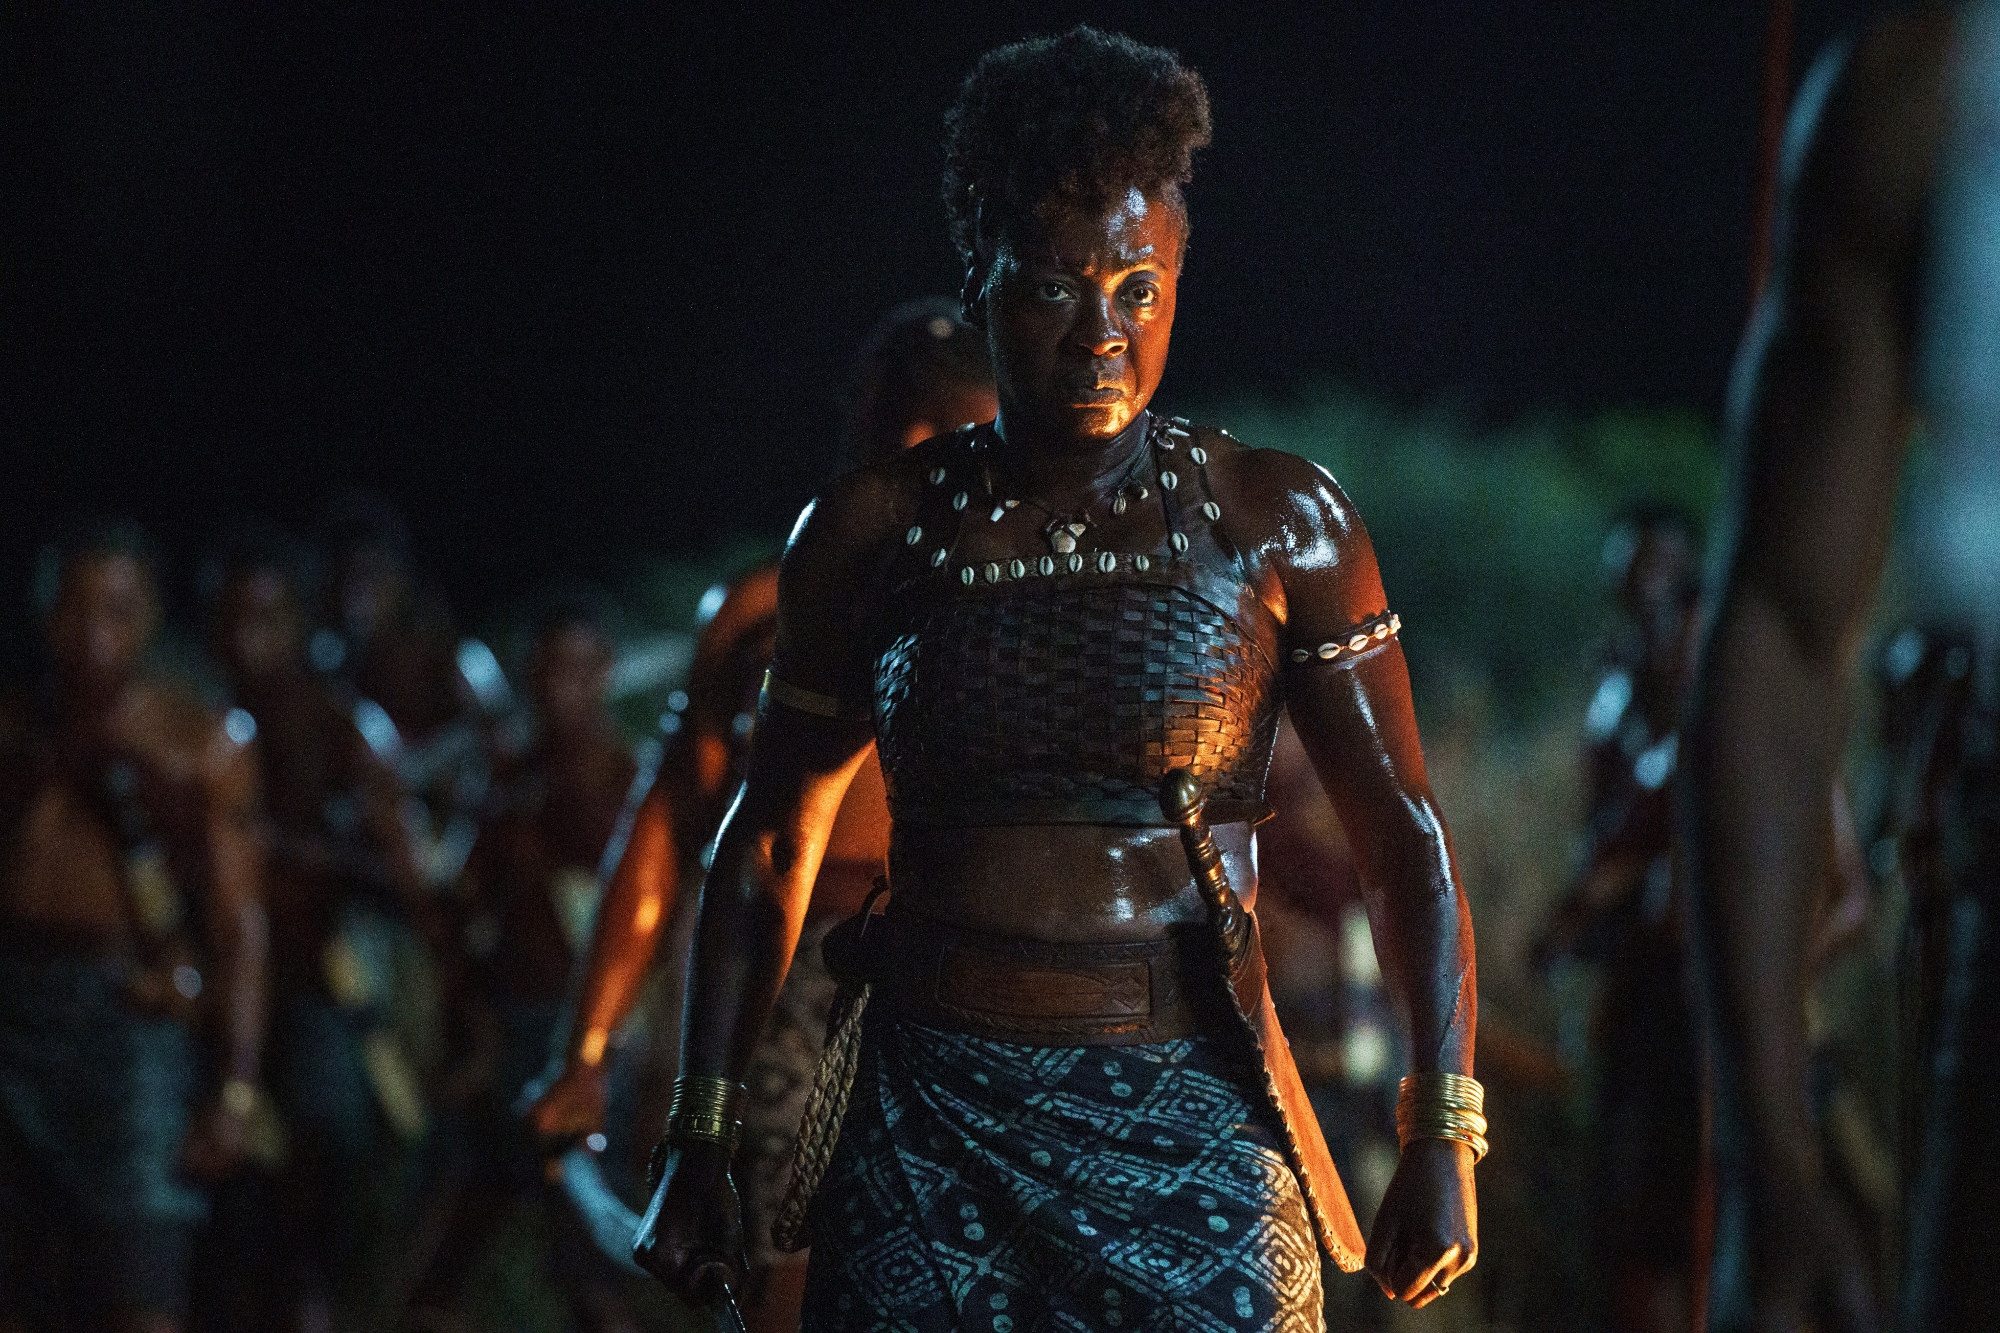 'The Woman King' Viola Davis as Nanisca looking serious wearing warrior clothes. Her warrior group stands behind her.